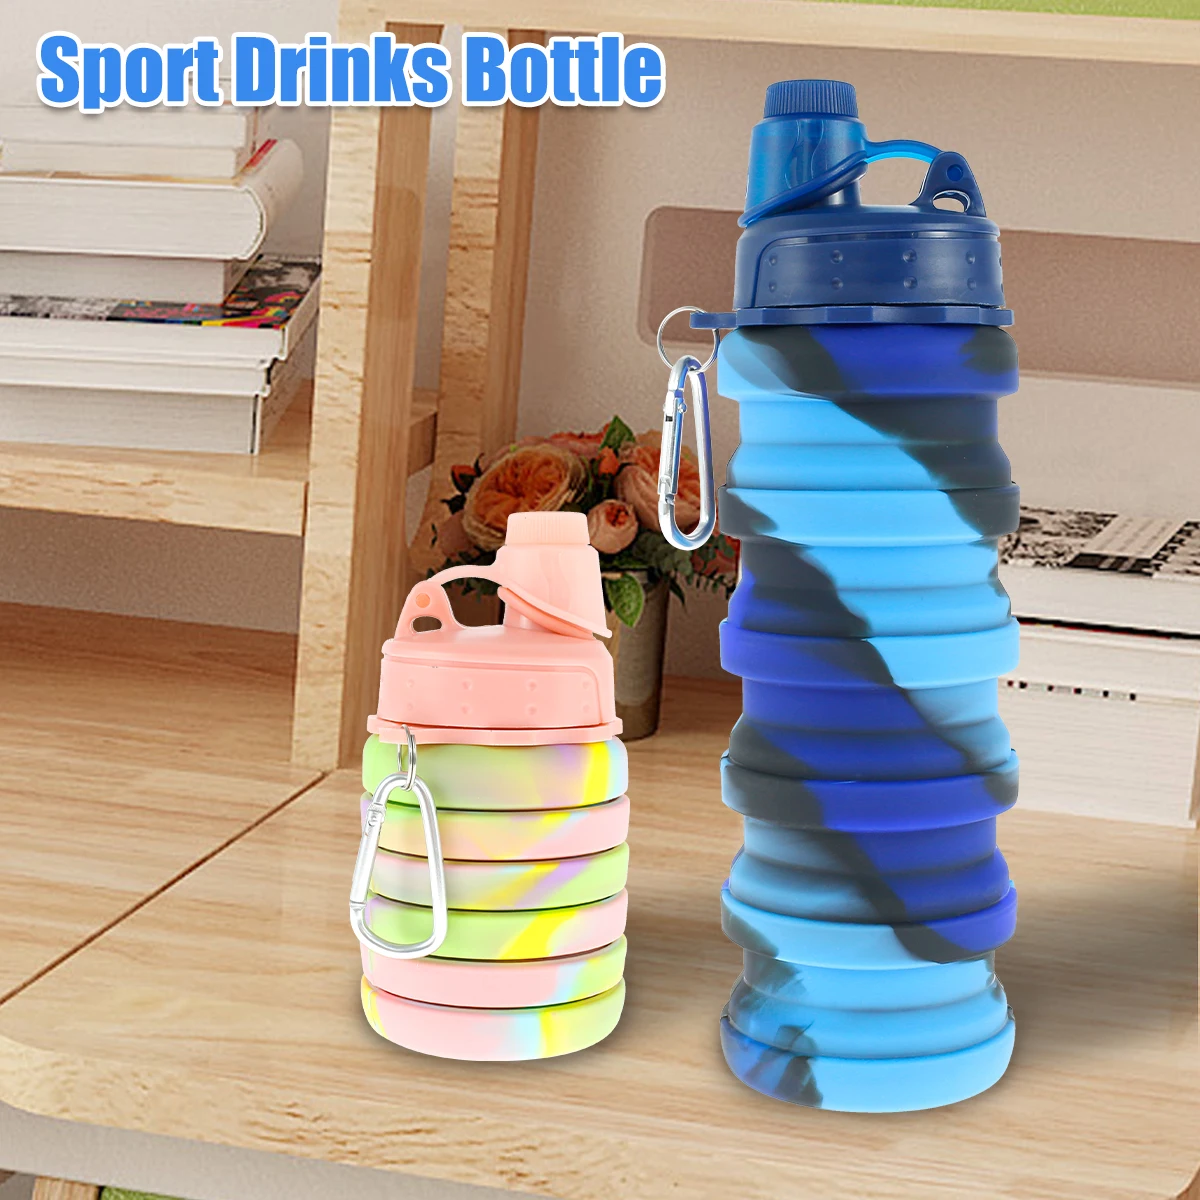 

225/500ml Foldable Water Bottle BPA-Free Drinking Cup Collapsible Silicone Squeezable Leakproof Sports Water Bottle for Camping